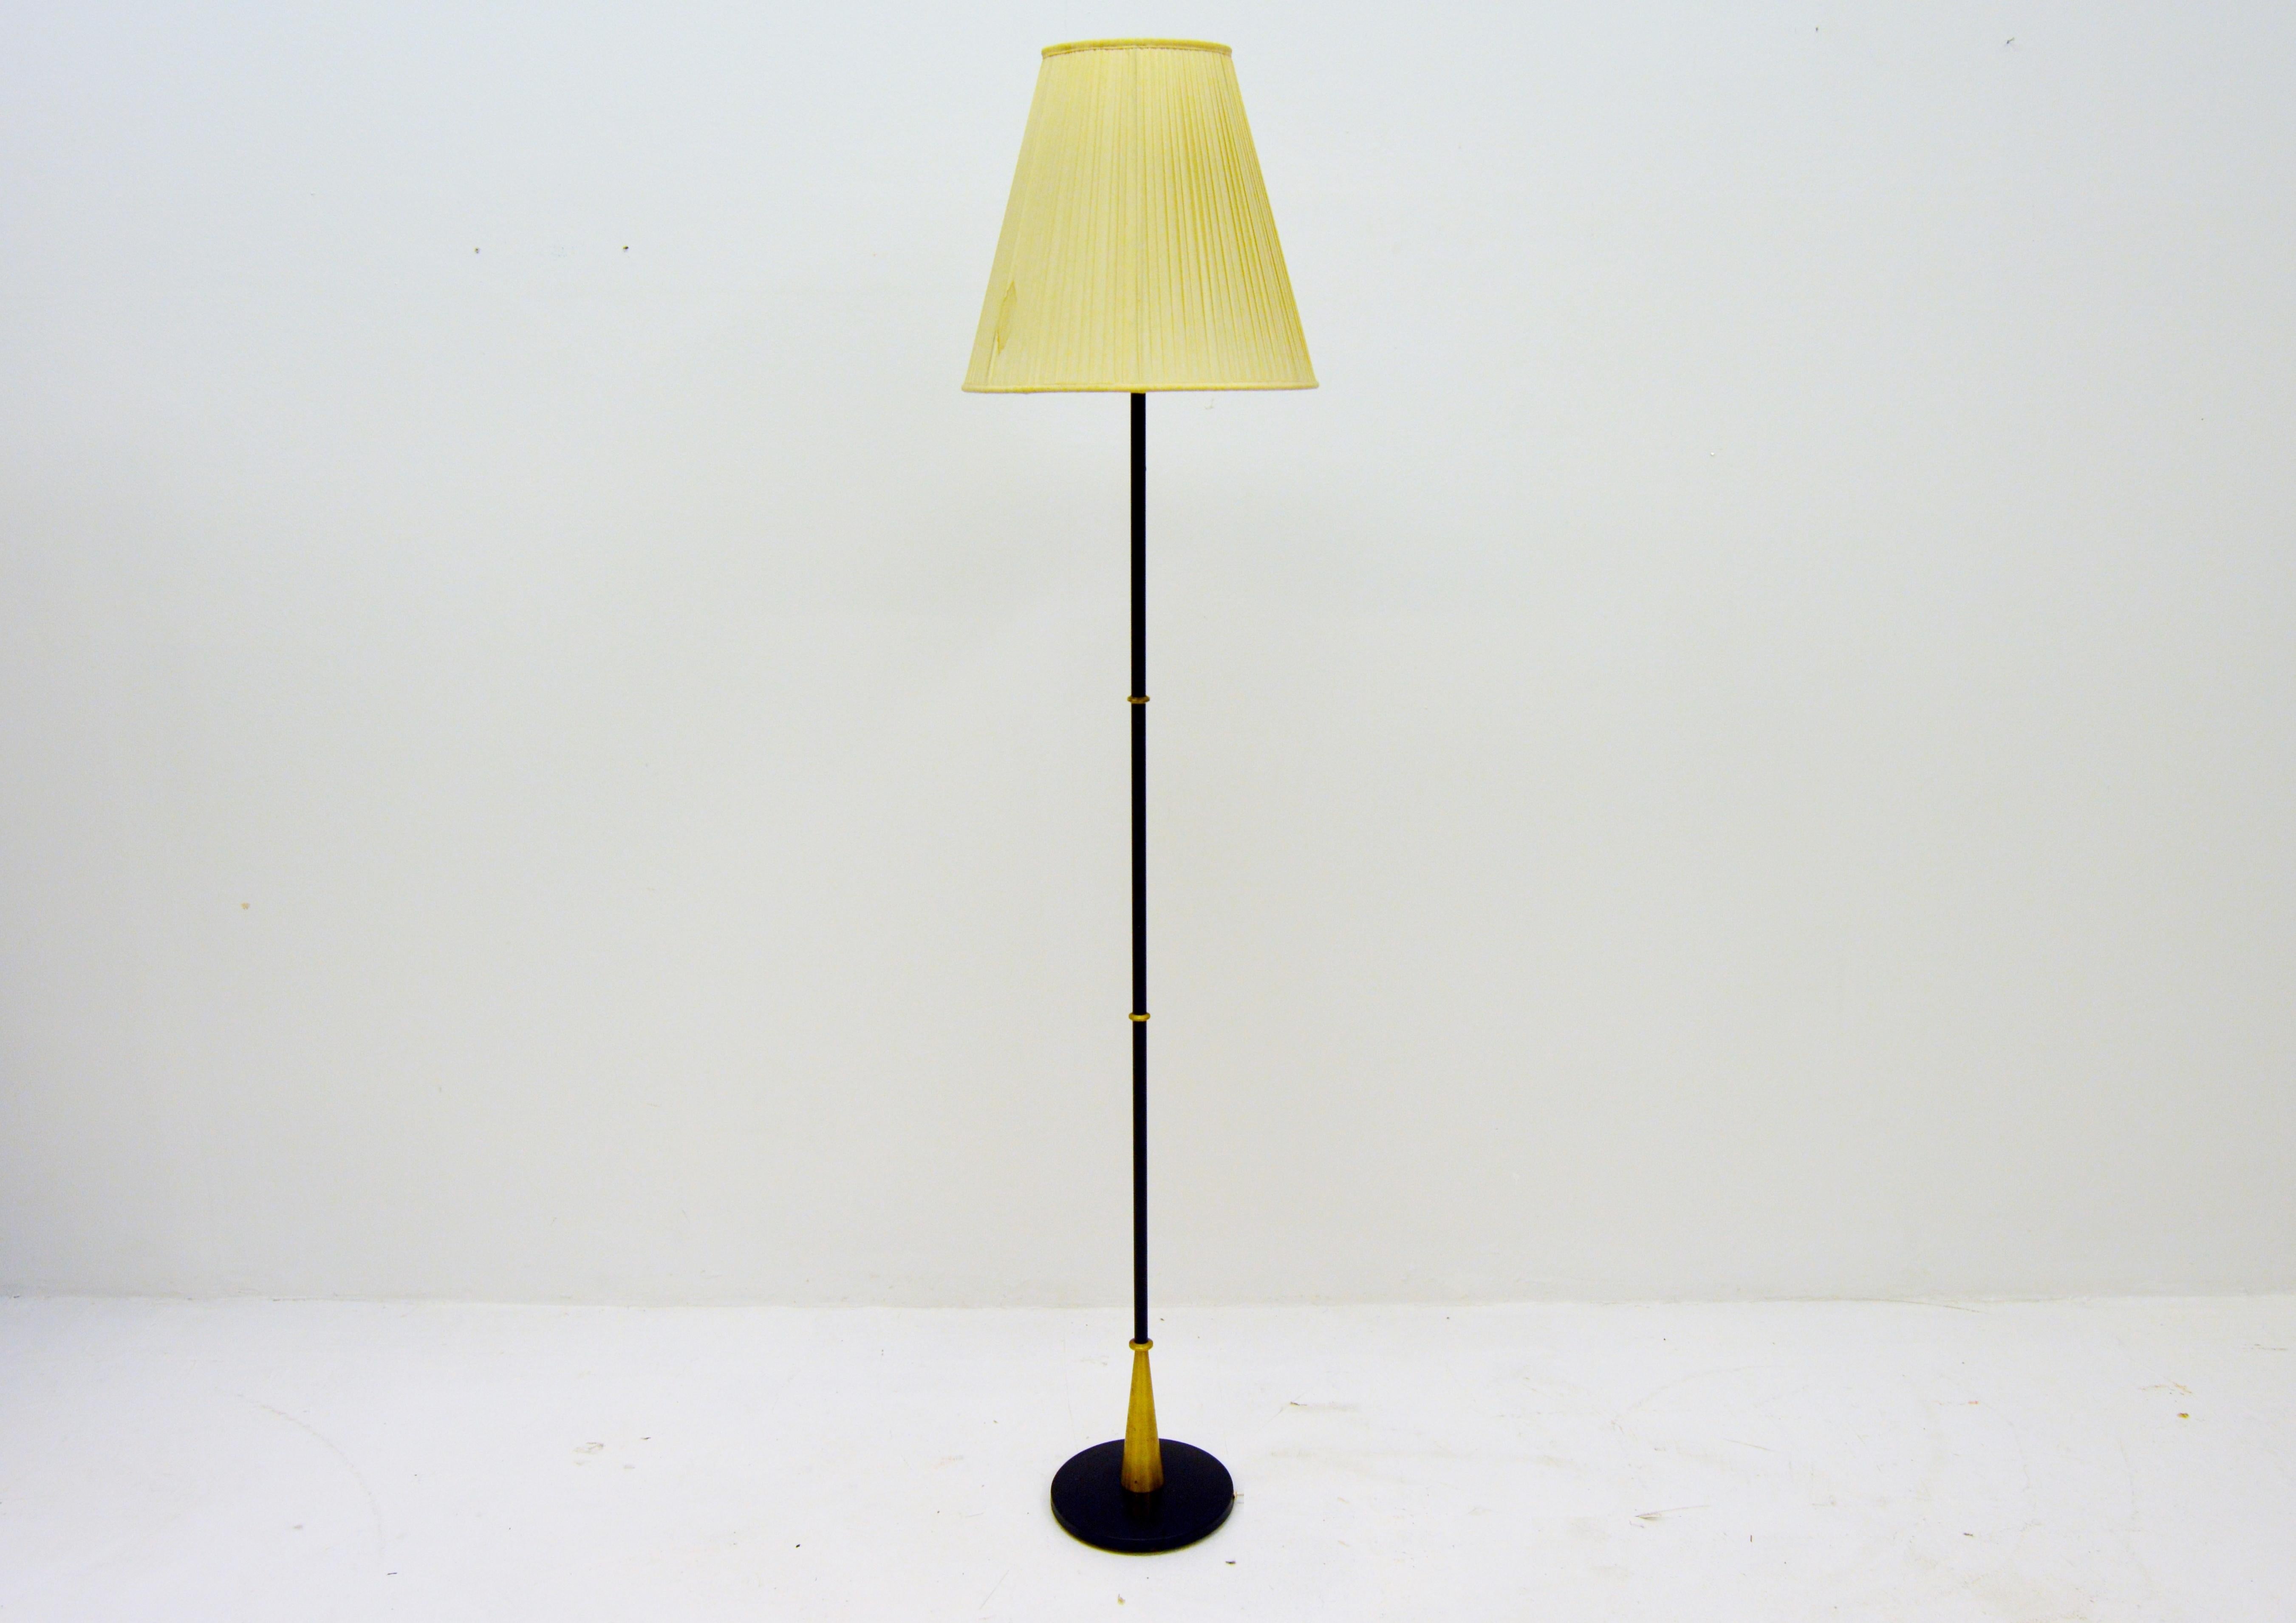 Unusual floor lamp with black metal bar and brass details. The brass at the foot forms a small cone and the rings make the lamp distinguish from other lamps from the same period of time. The top is an uplight made of glass and the lampshade is